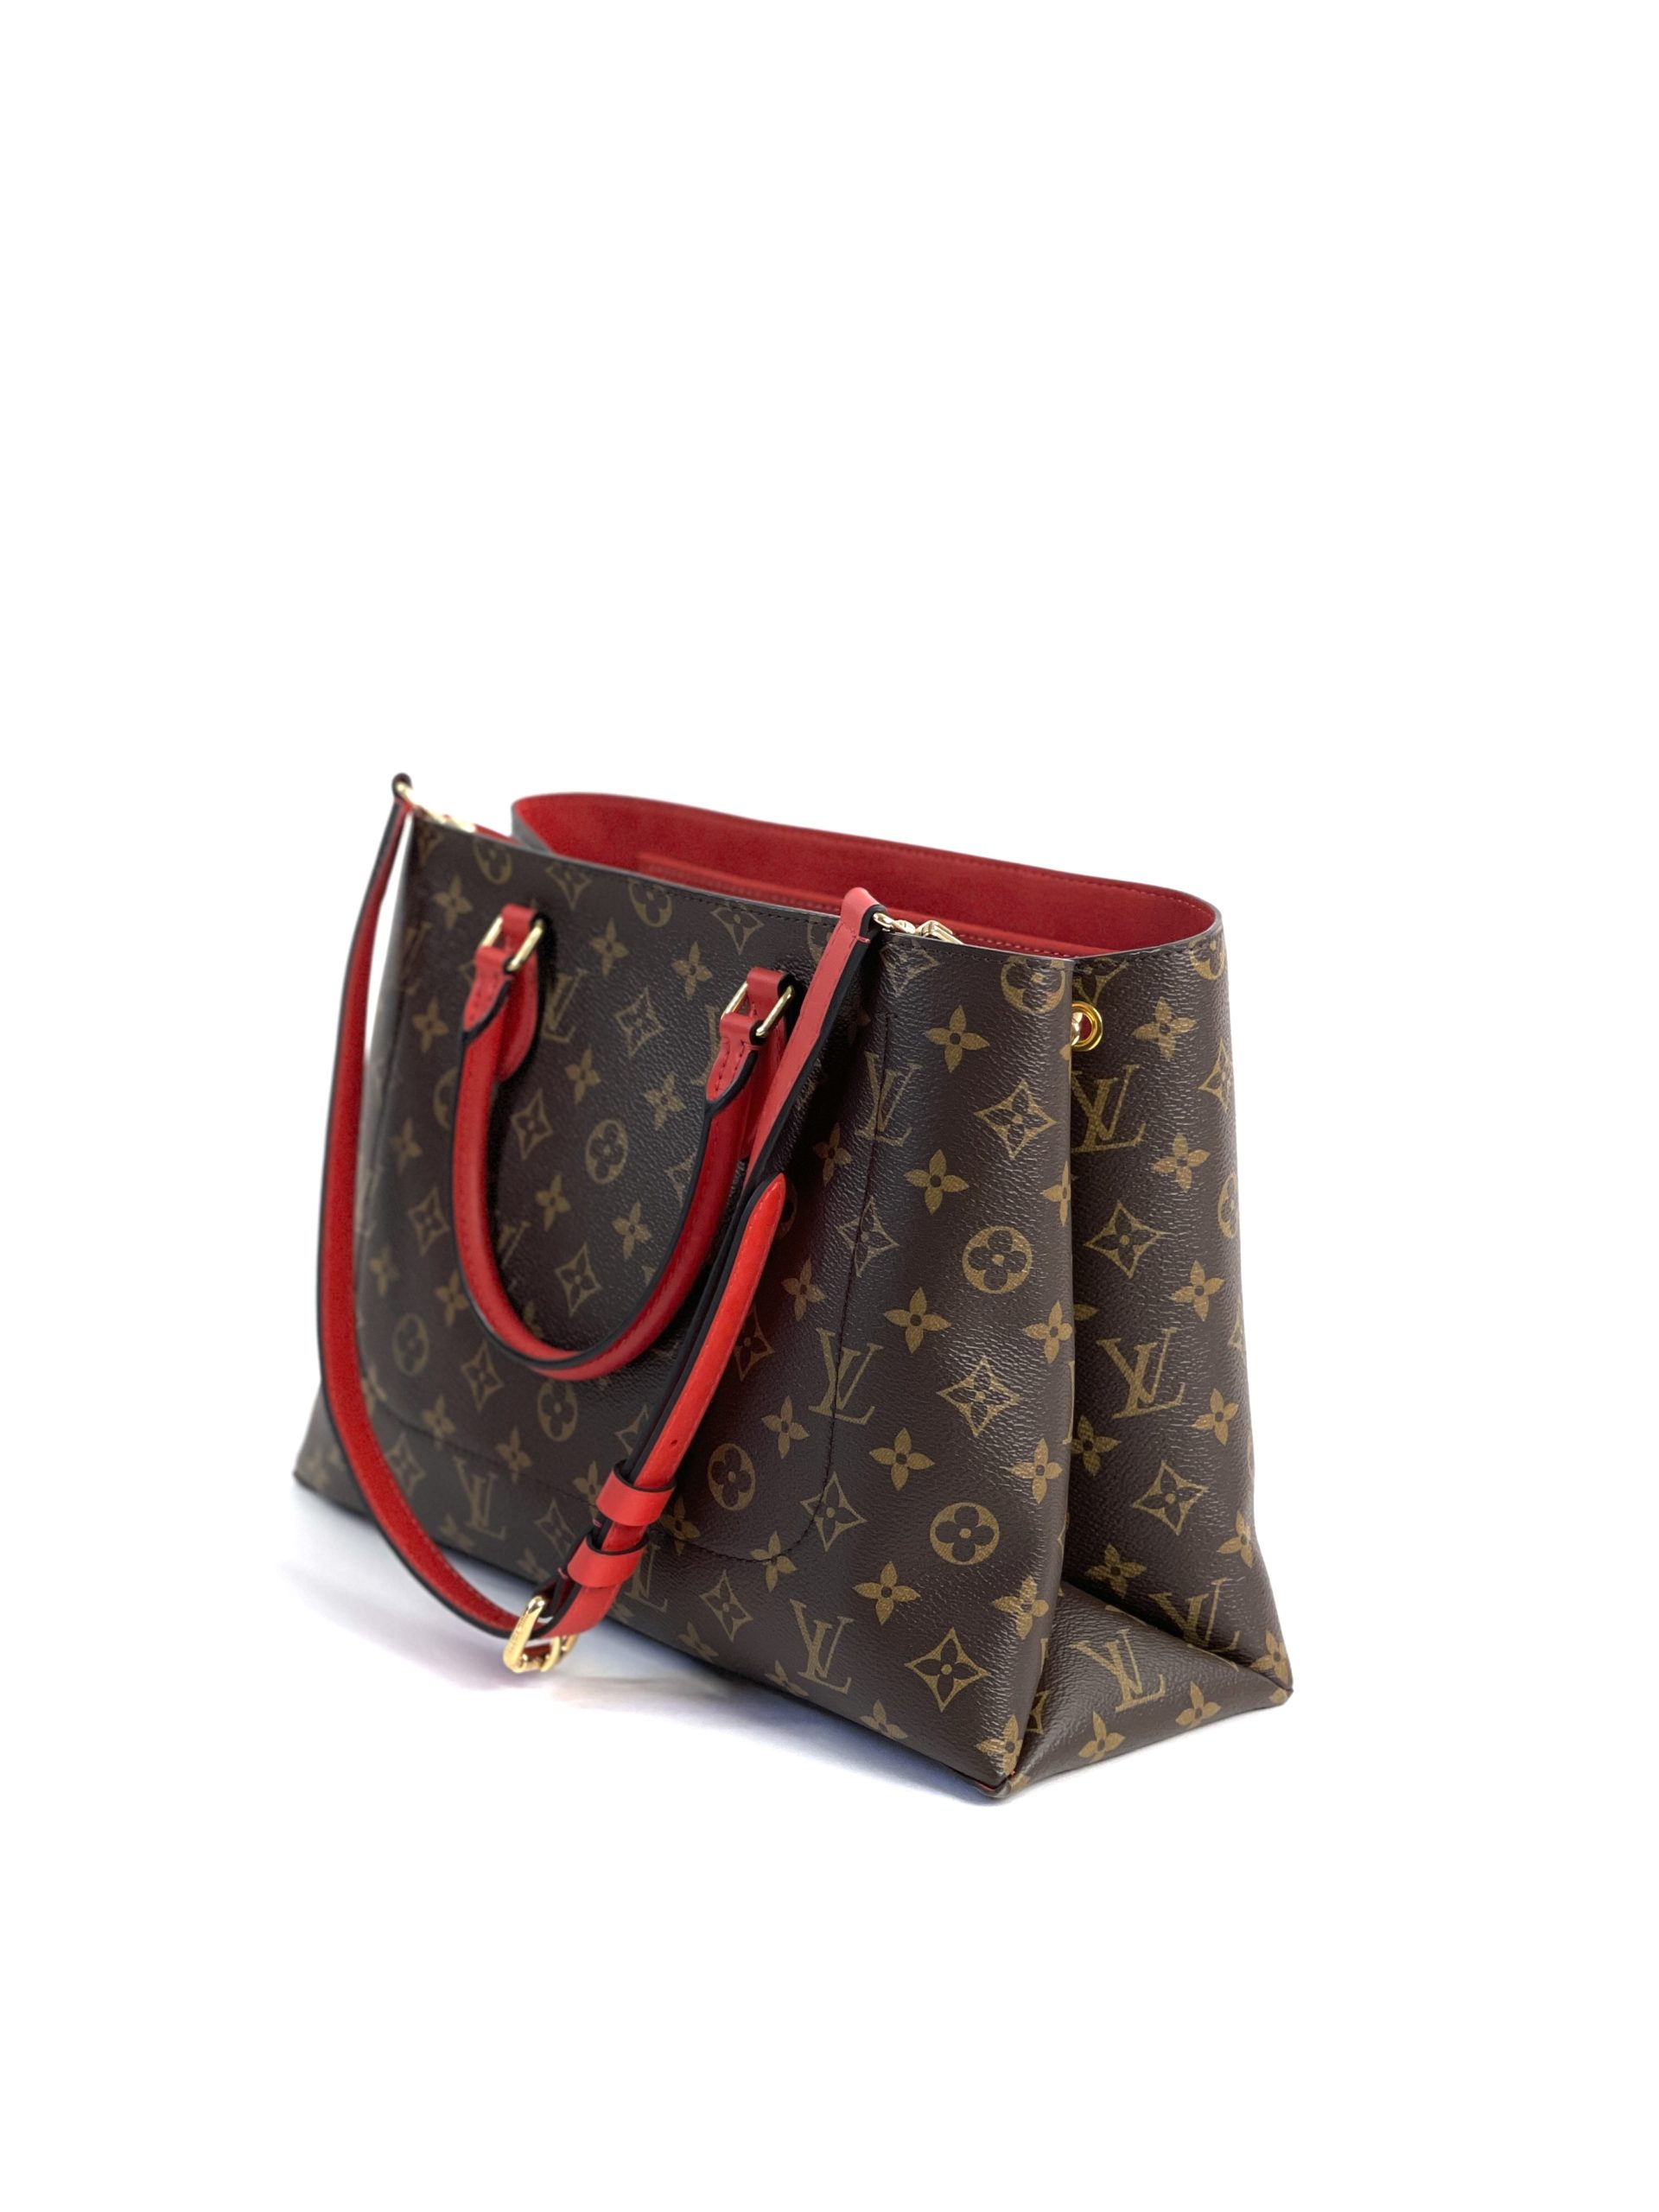 Products by Louis Vuitton: Cluny BB  Louis vuitton bag outfit, Louis  vuitton handbags, Louis vuitton bag neverfull